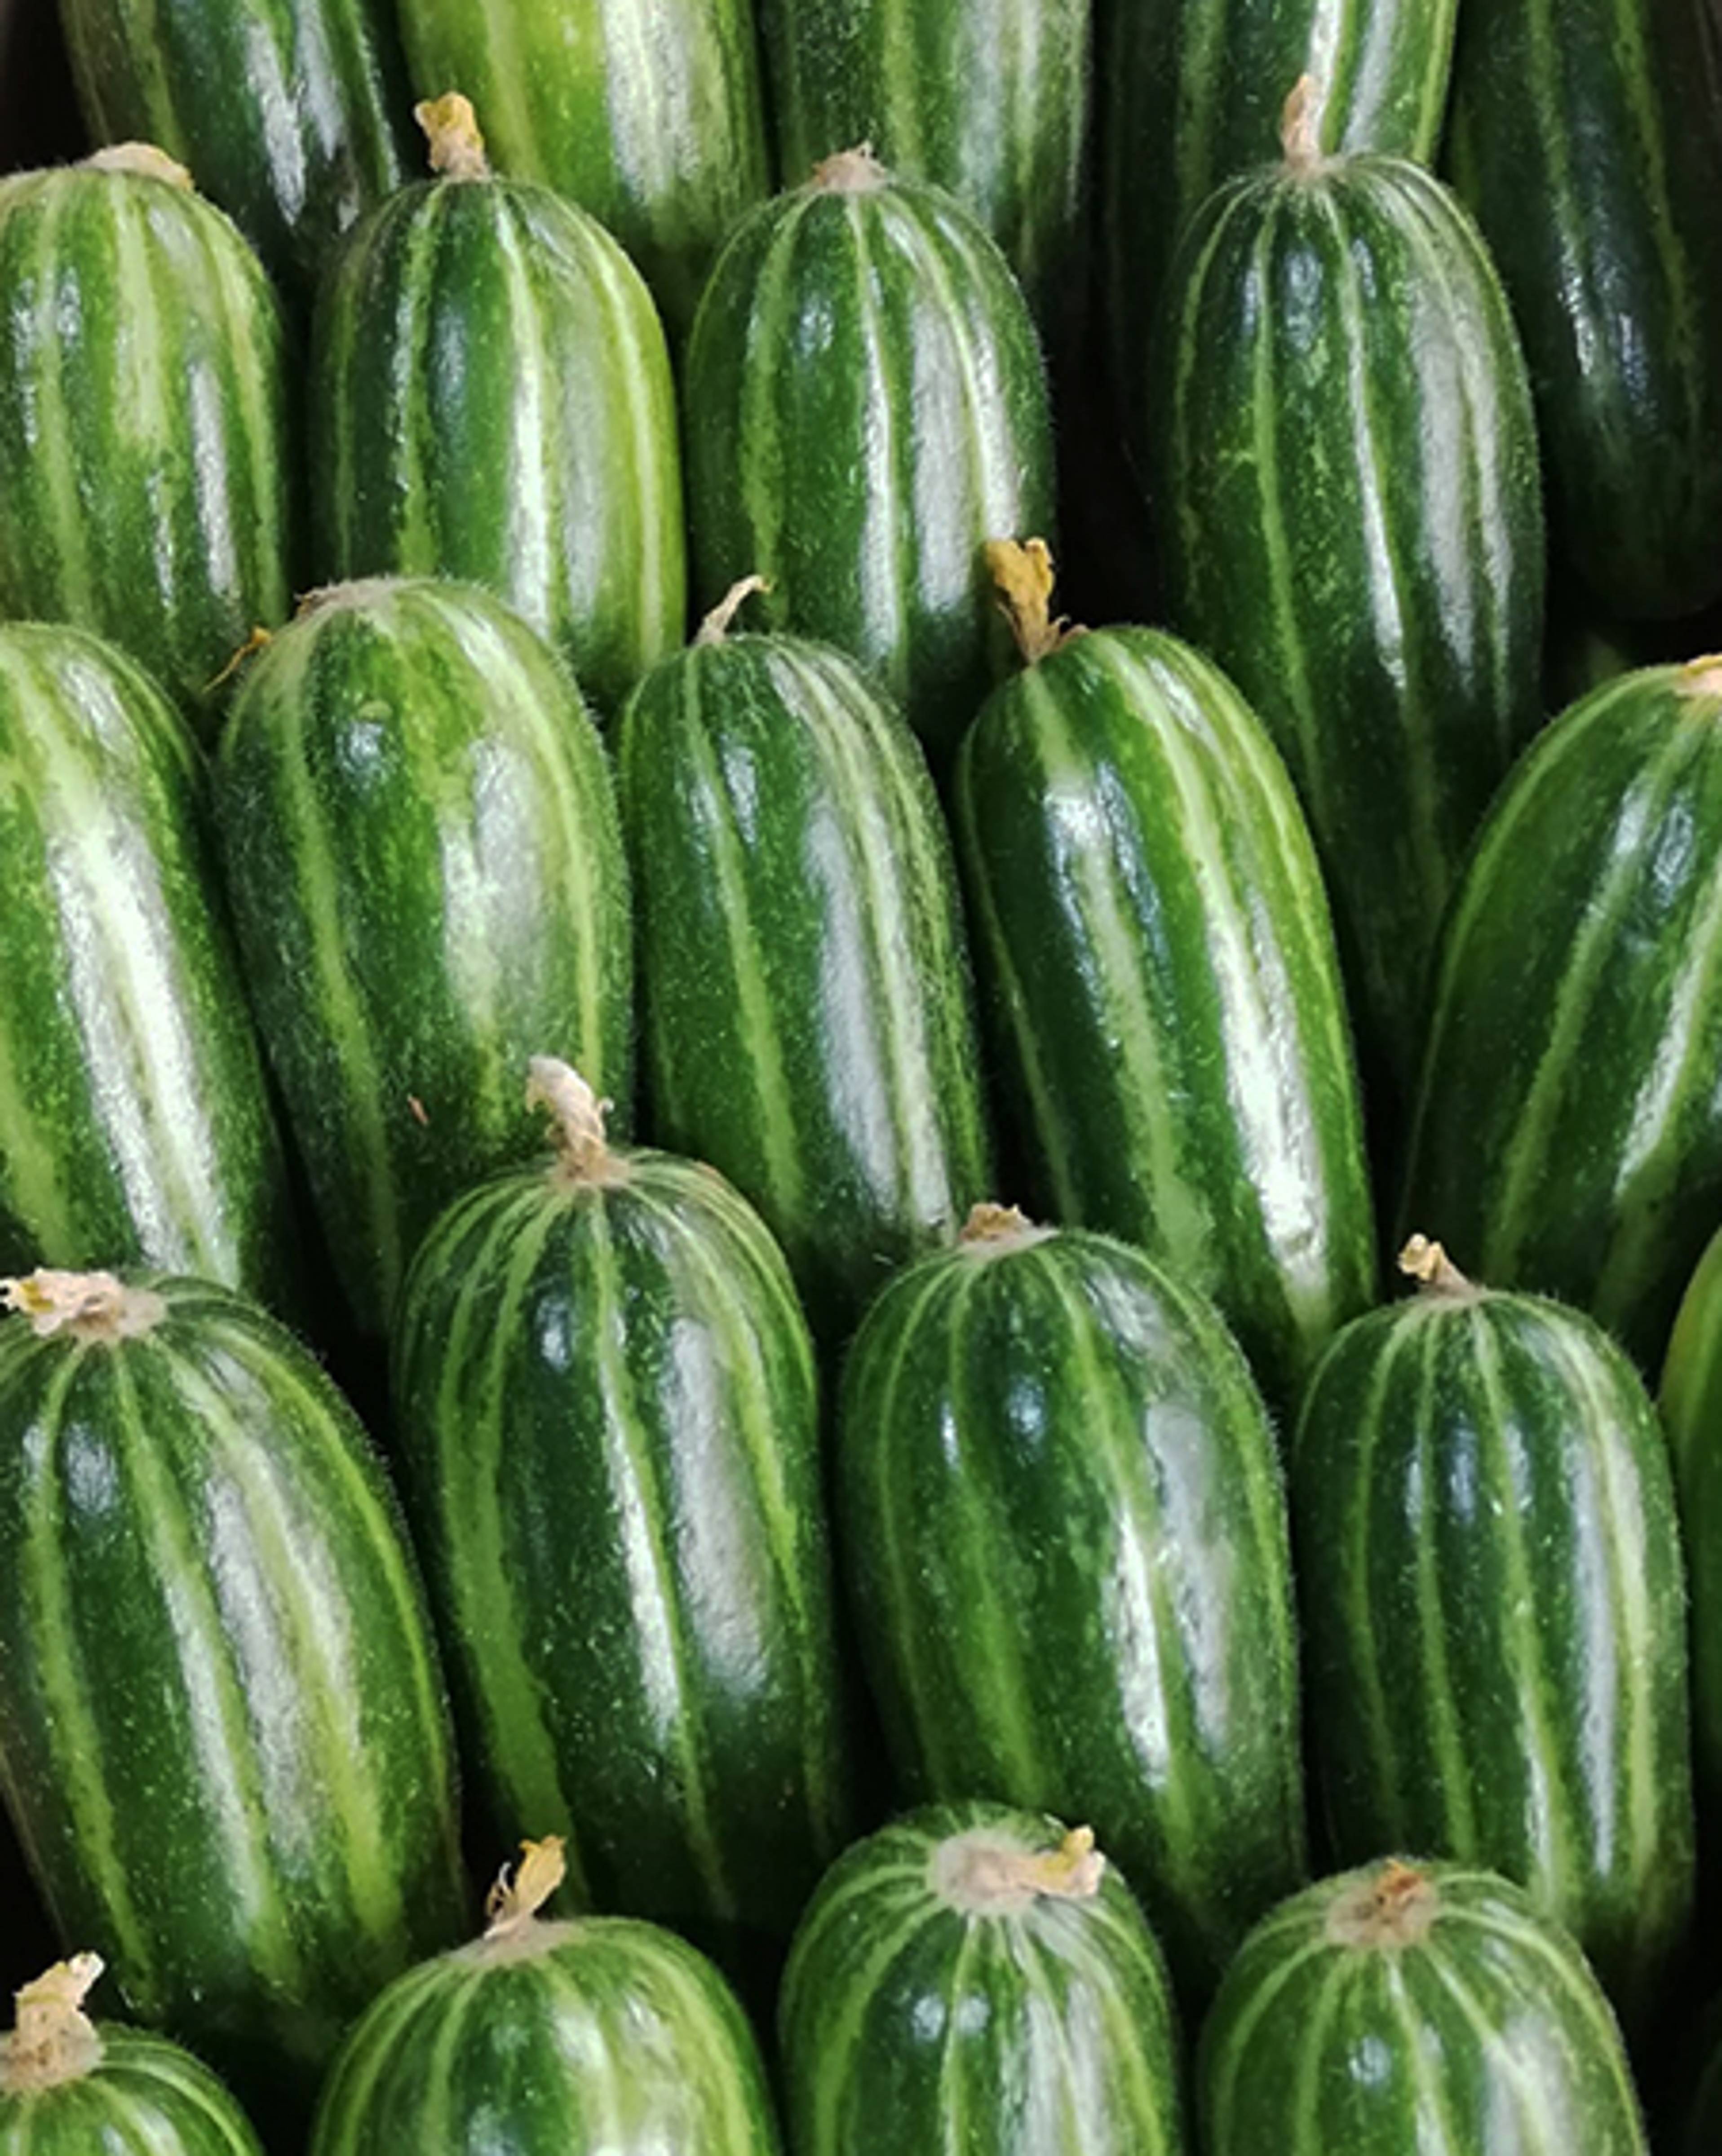 gherkin cucumbers lined up in a row